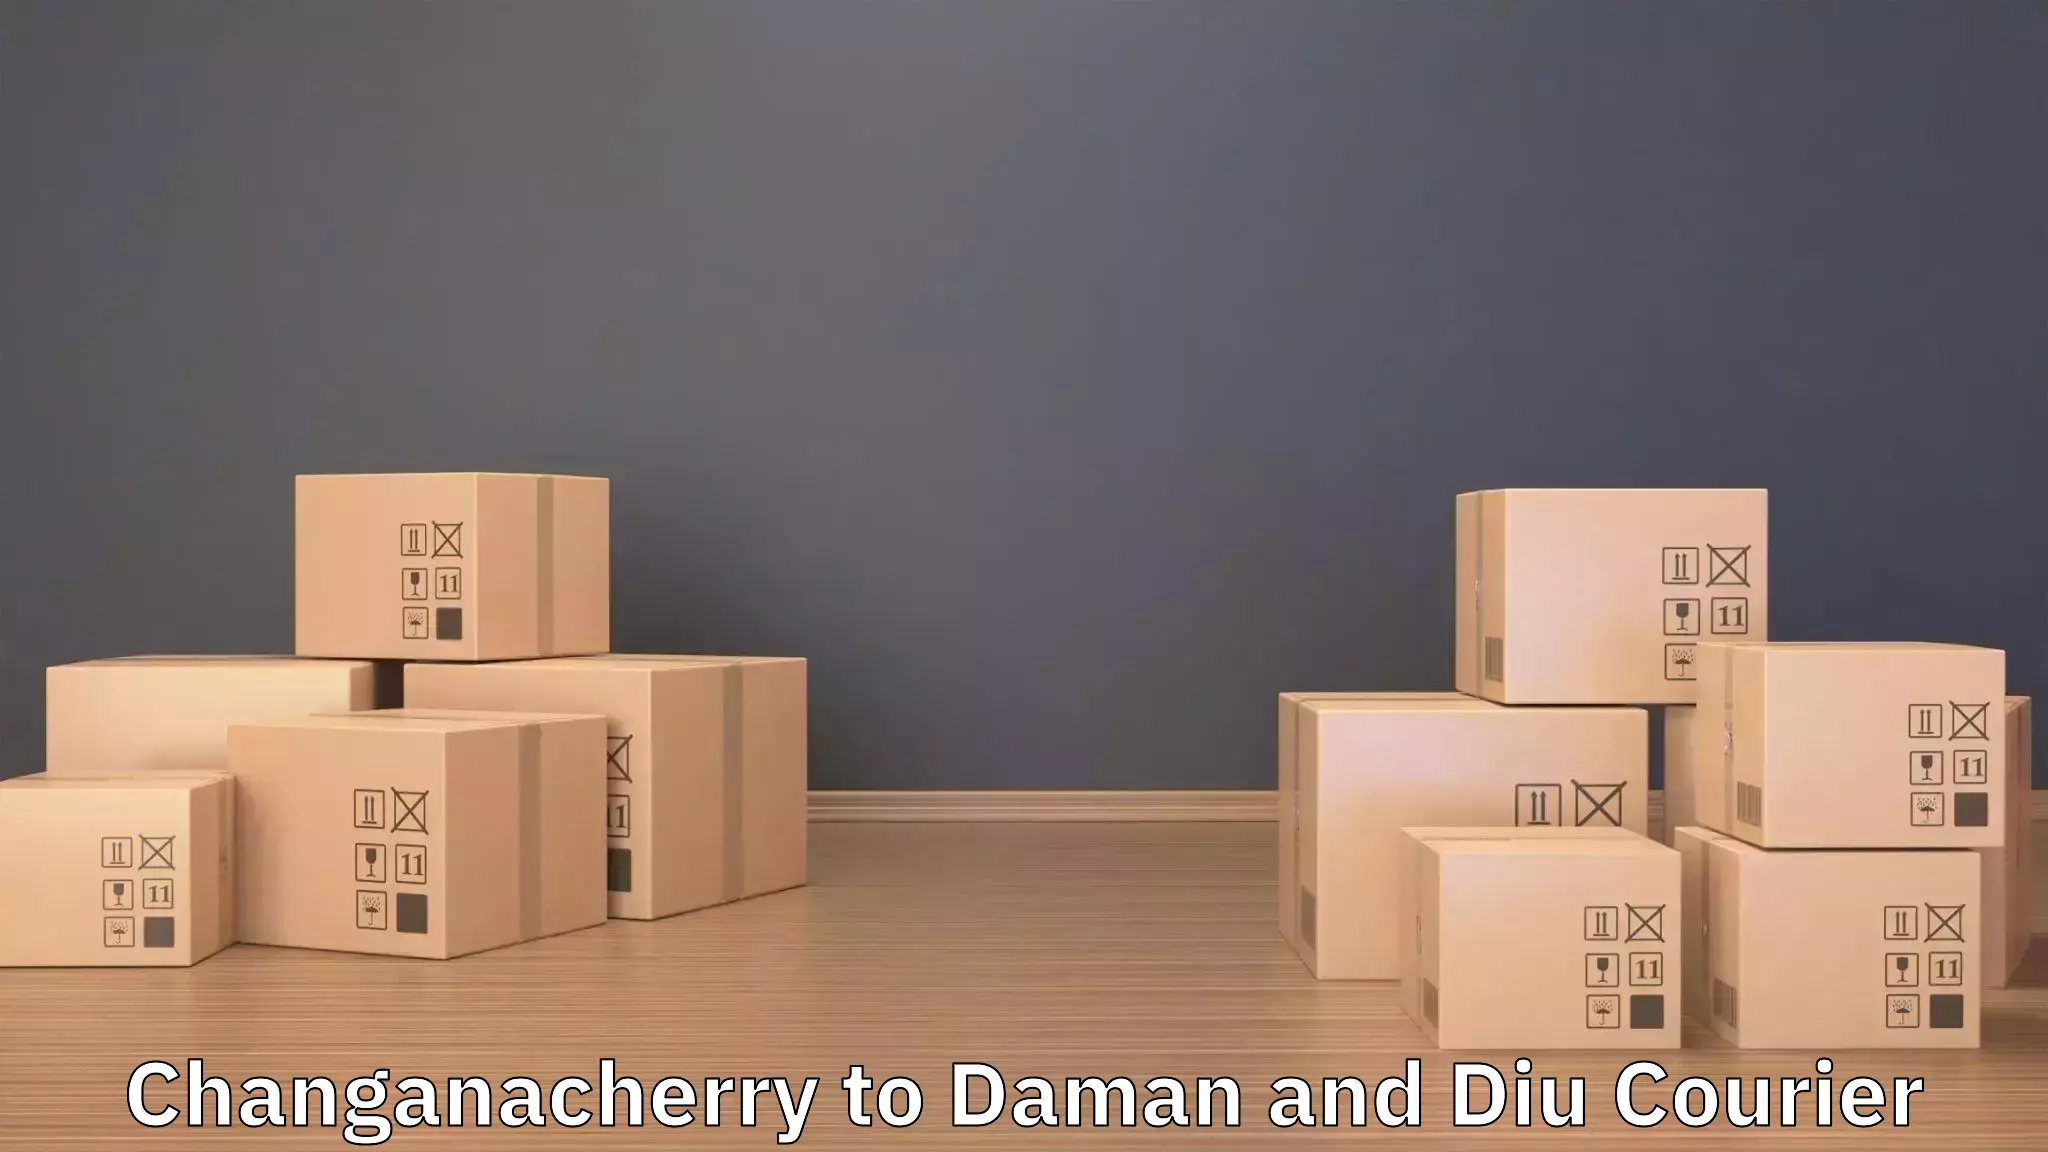 Efficient relocation services in Changanacherry to Diu